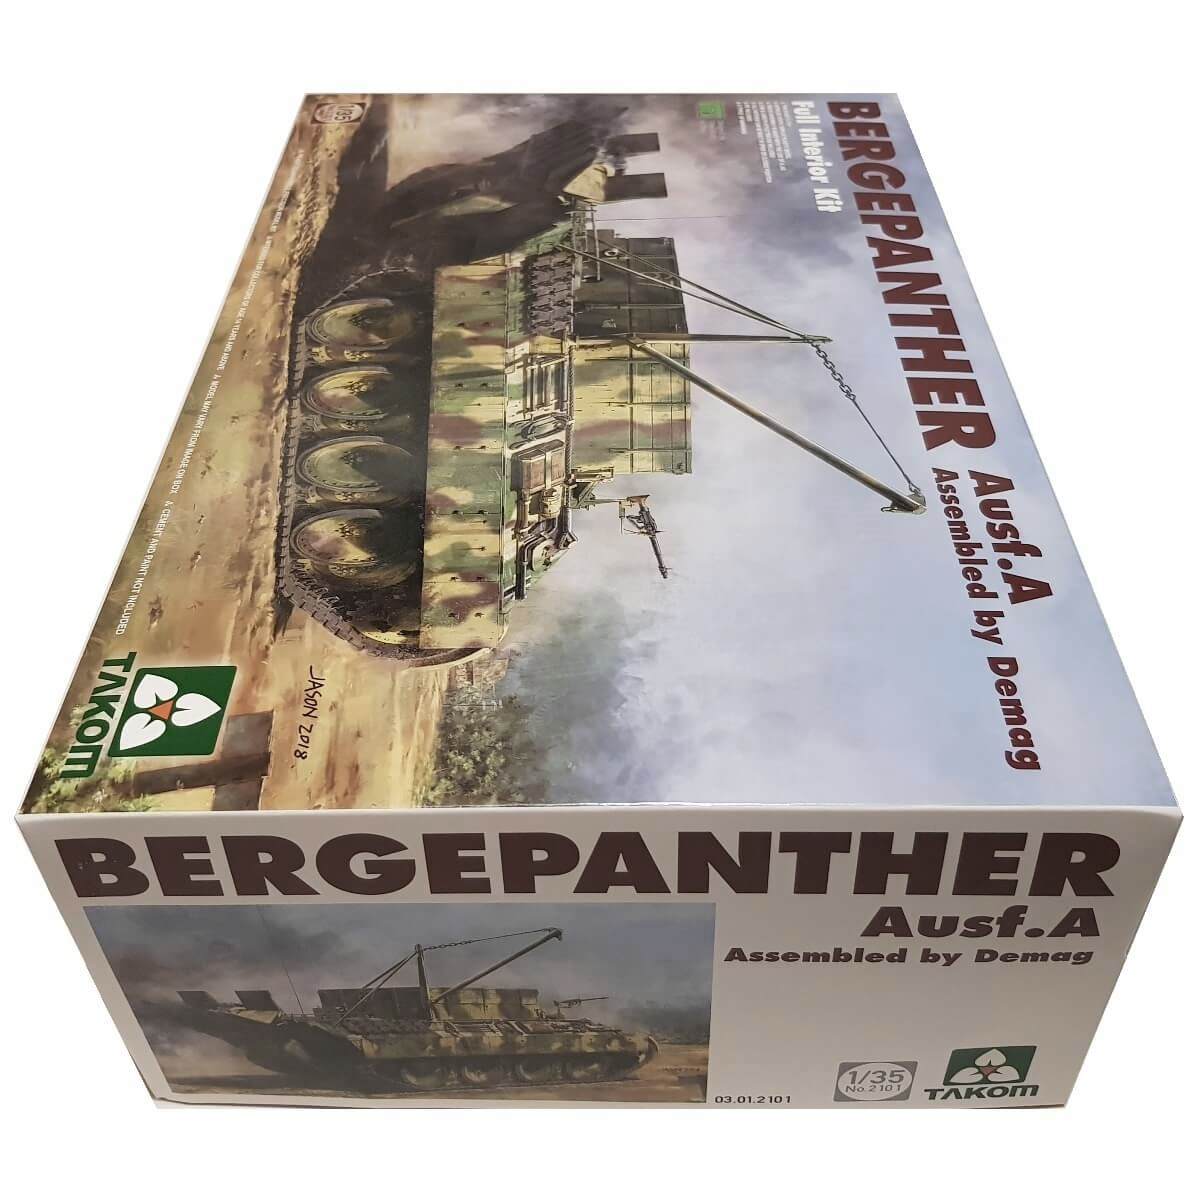 1:35 Bergepanther Ausf. A Assembled by Demag - TAKOM